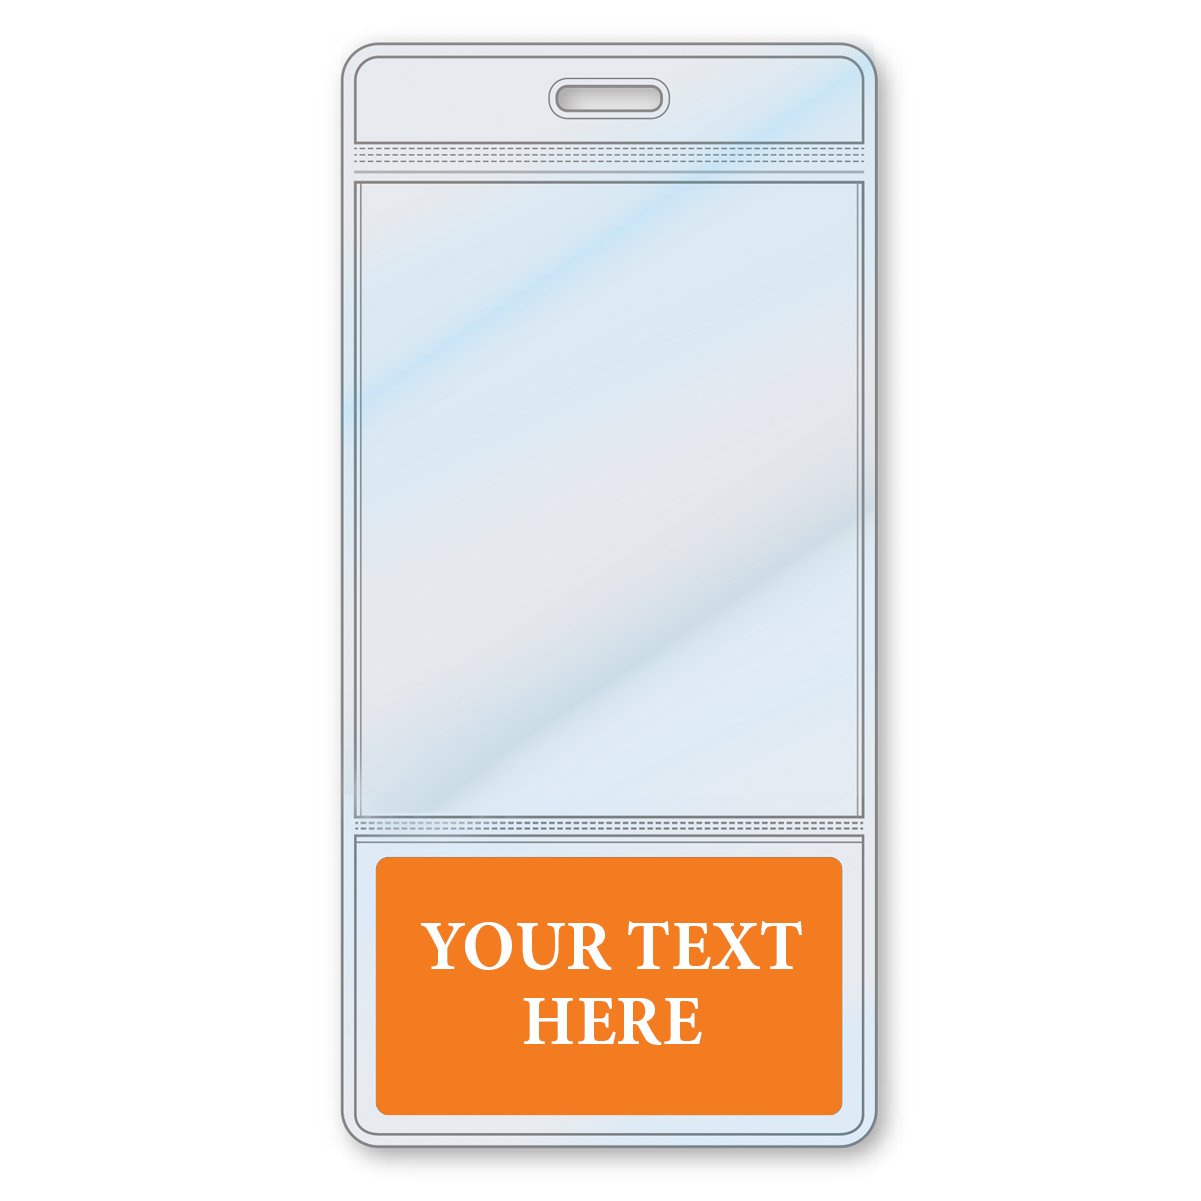 A Custom Printed BadgeBottoms® Vertical (Badge Holder & Badge Buddy IN ONE!!) with a transparent section at the top and an orange label at the bottom that reads "Your Text Here." Perfect for role identification.